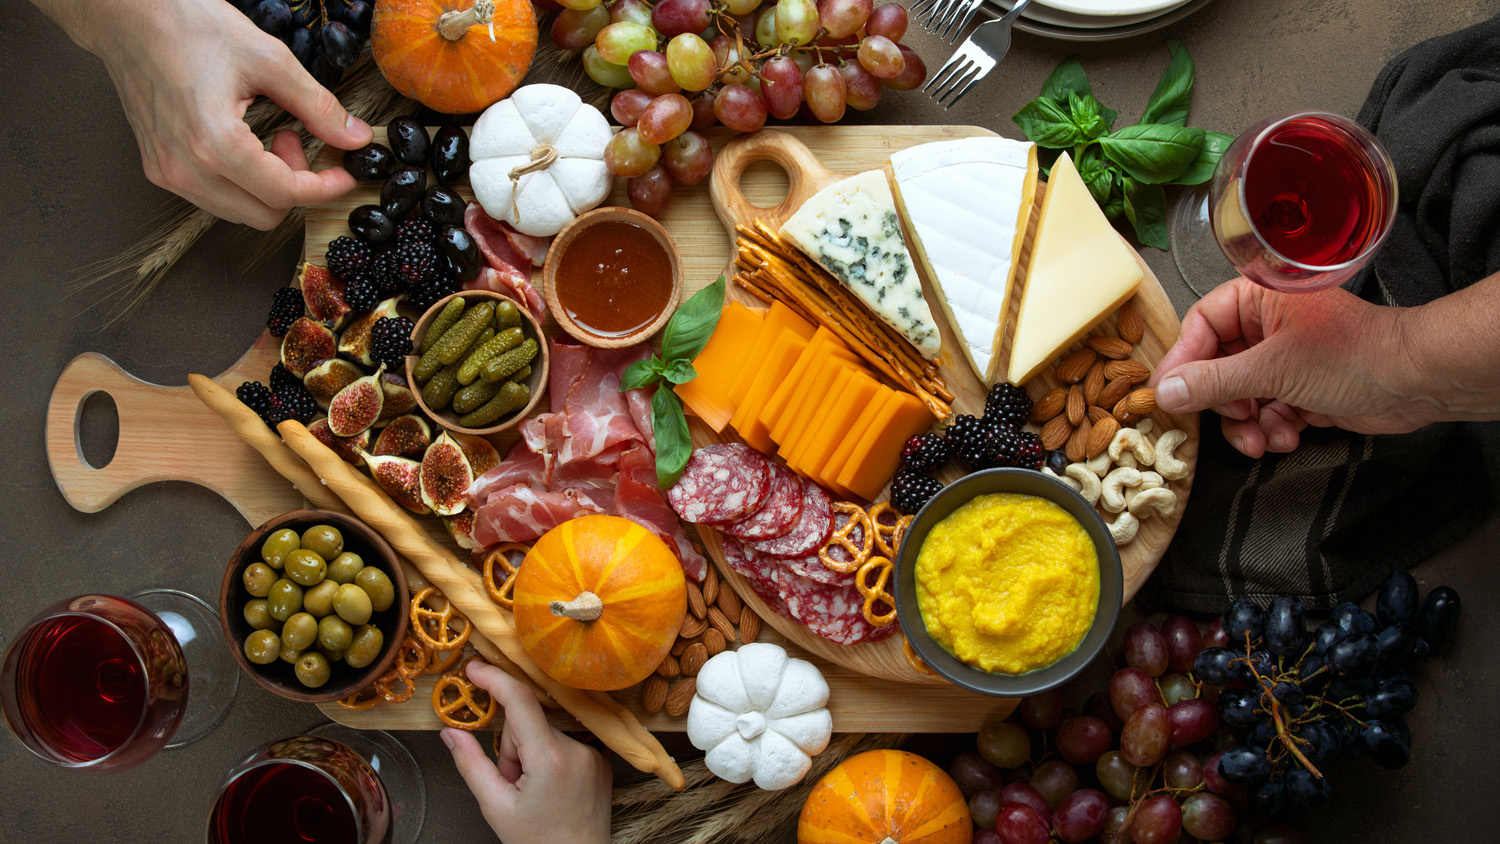 Overhead view of fall holidays table with friends hands picking some fingerfood appetizers from a charcuterie board